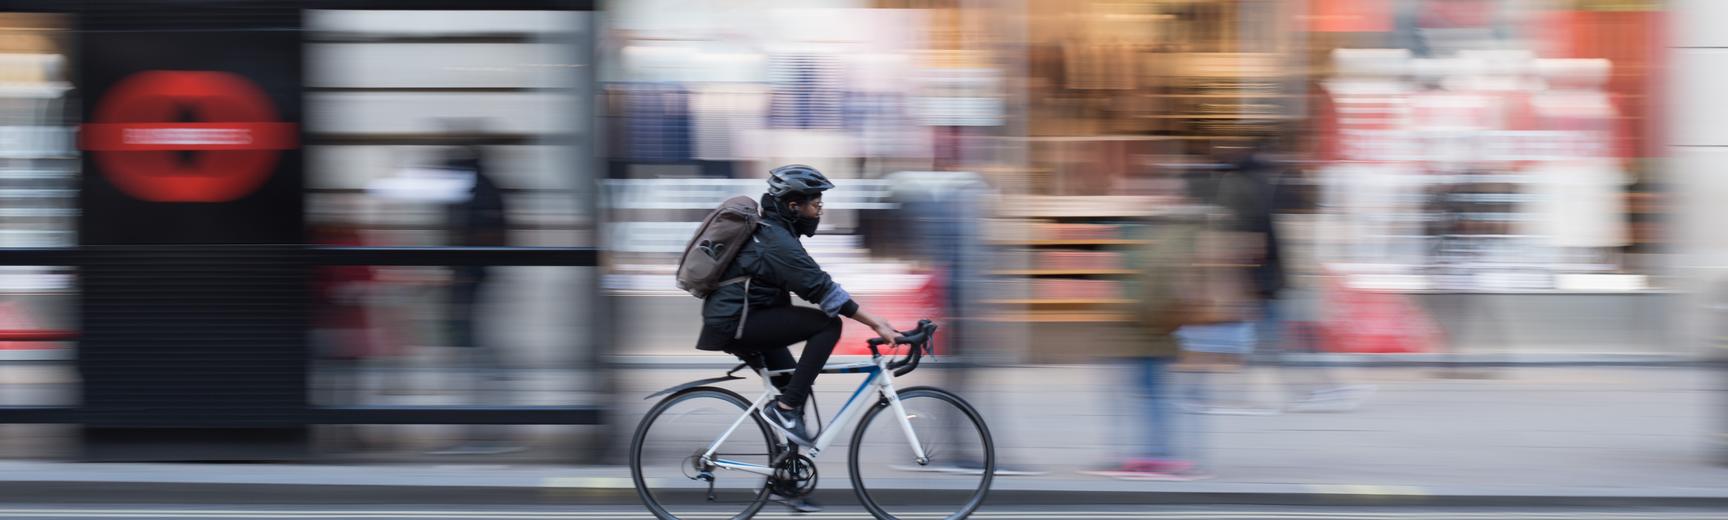 Blurred image of a cyclist cycling down a London street, past a bus stop and shops